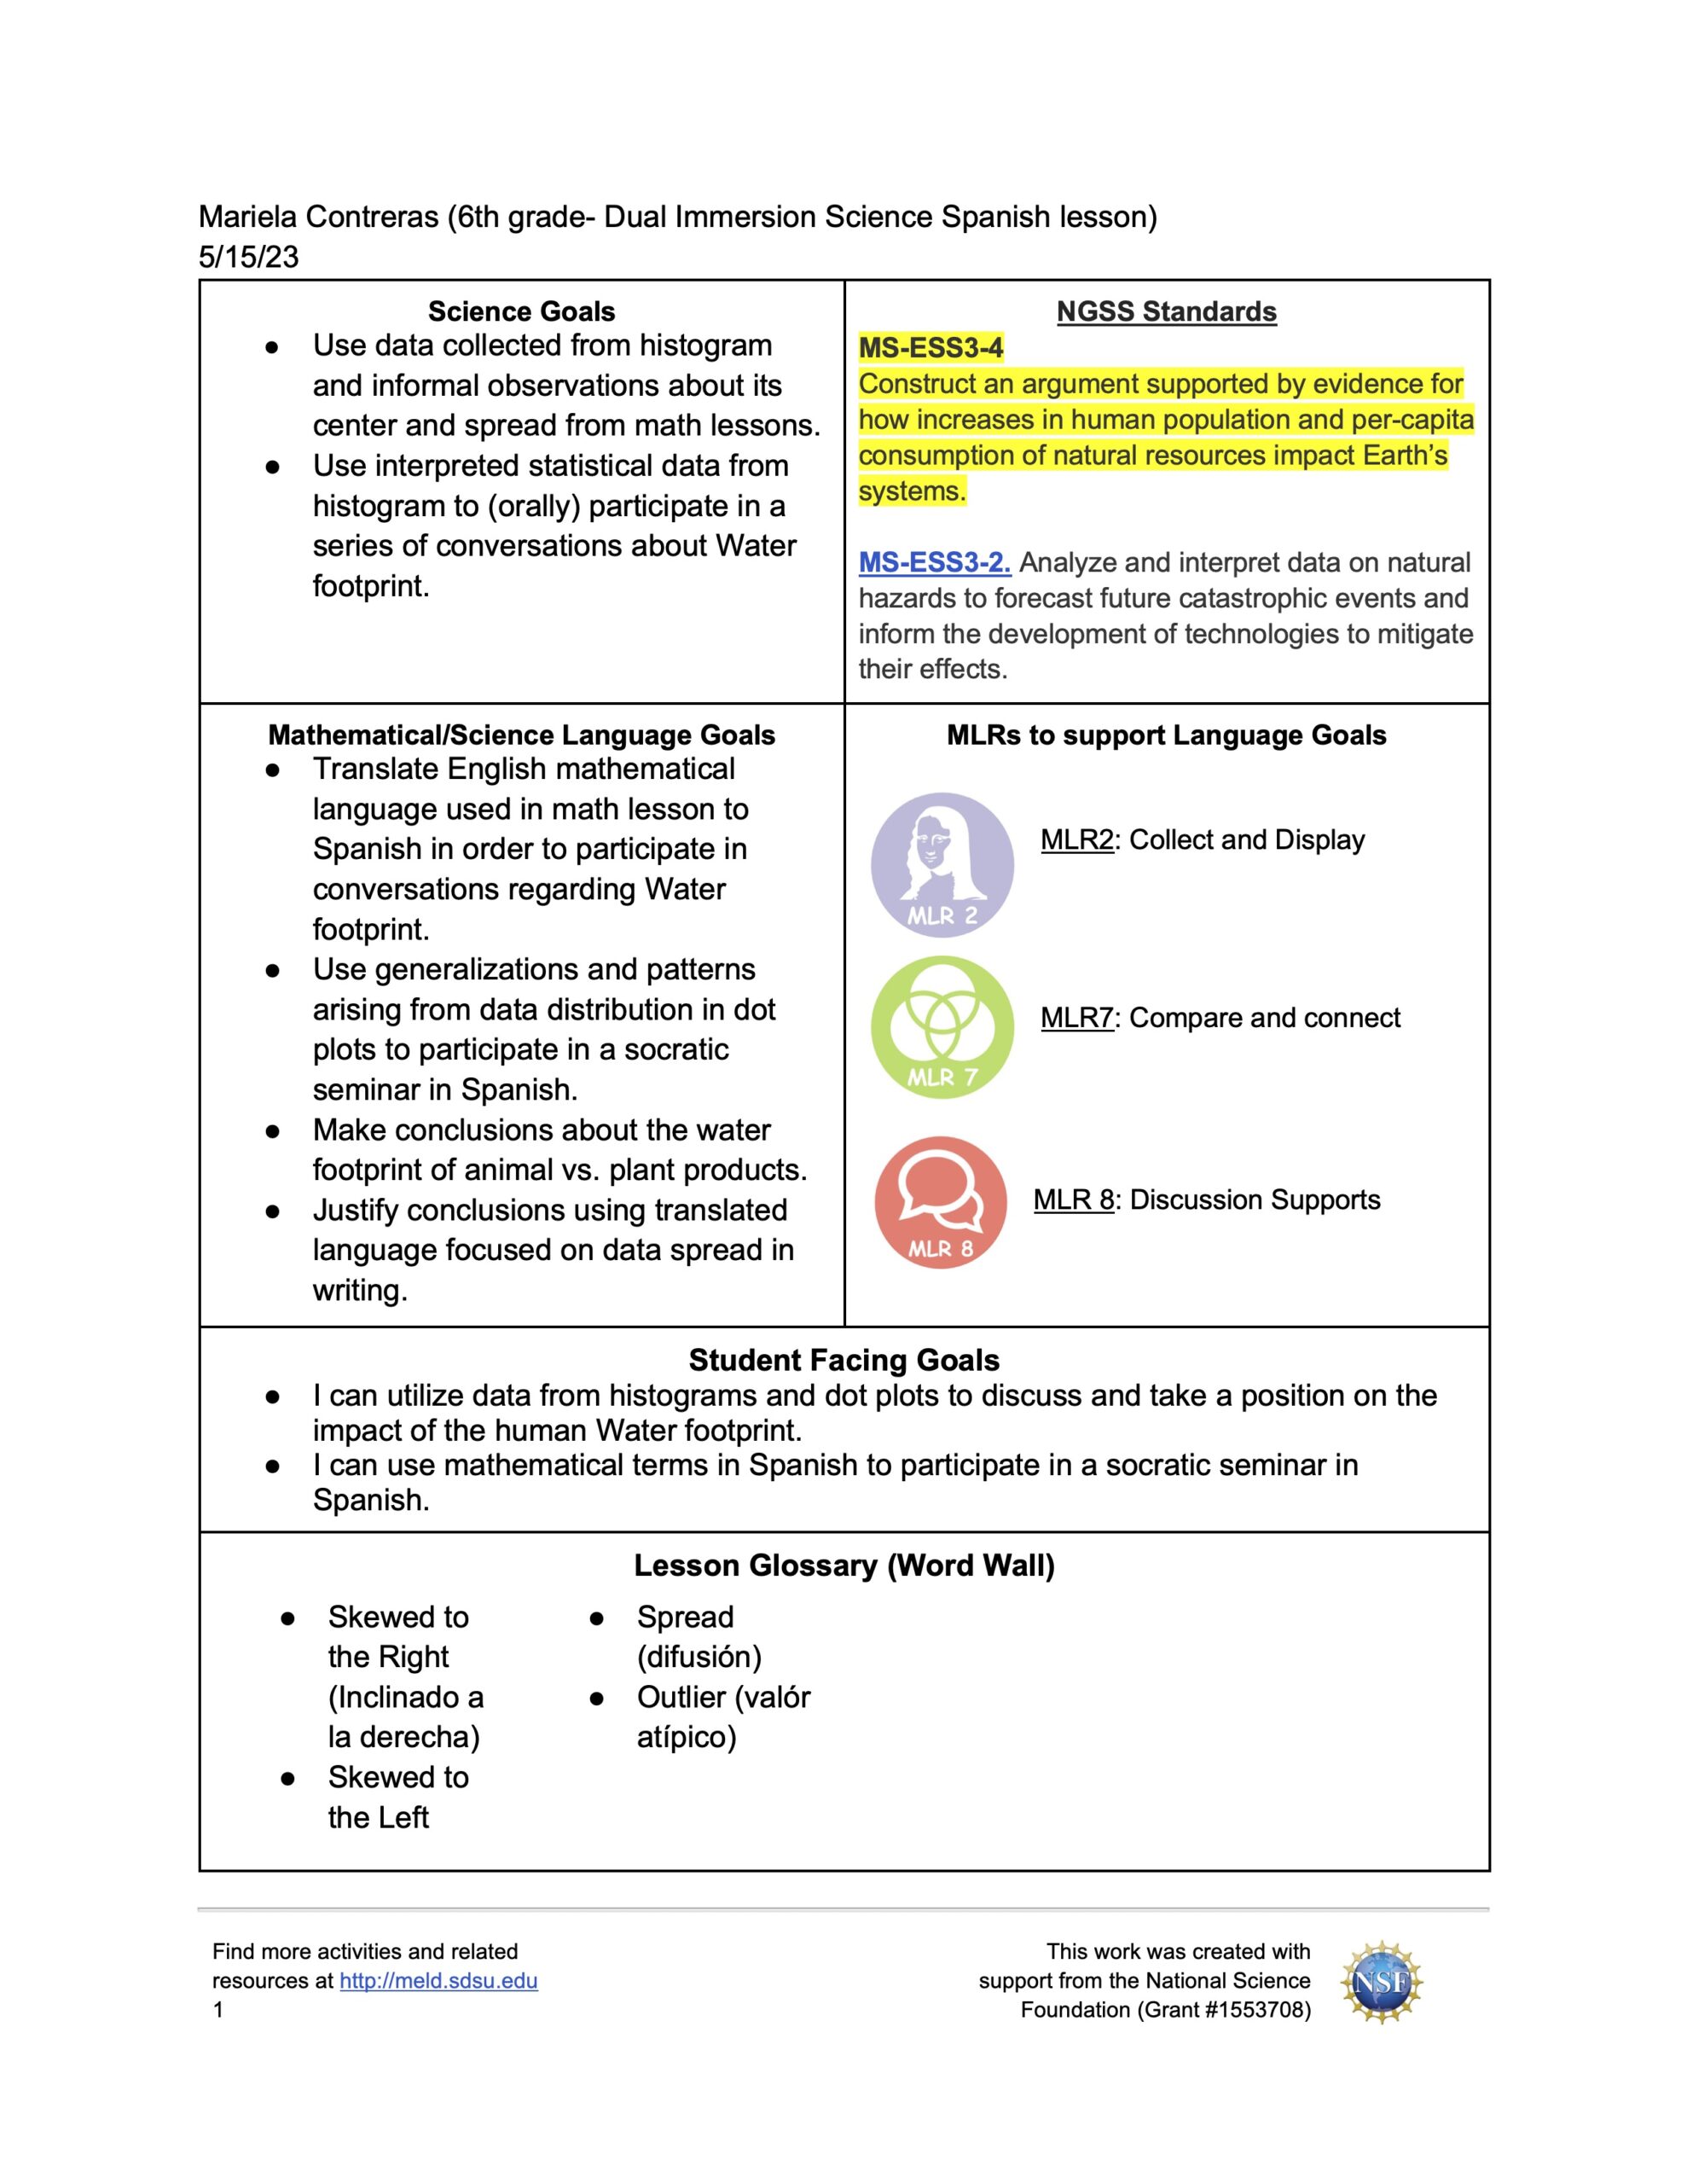 ELSF MS Science Lesson Plan (Spanish)